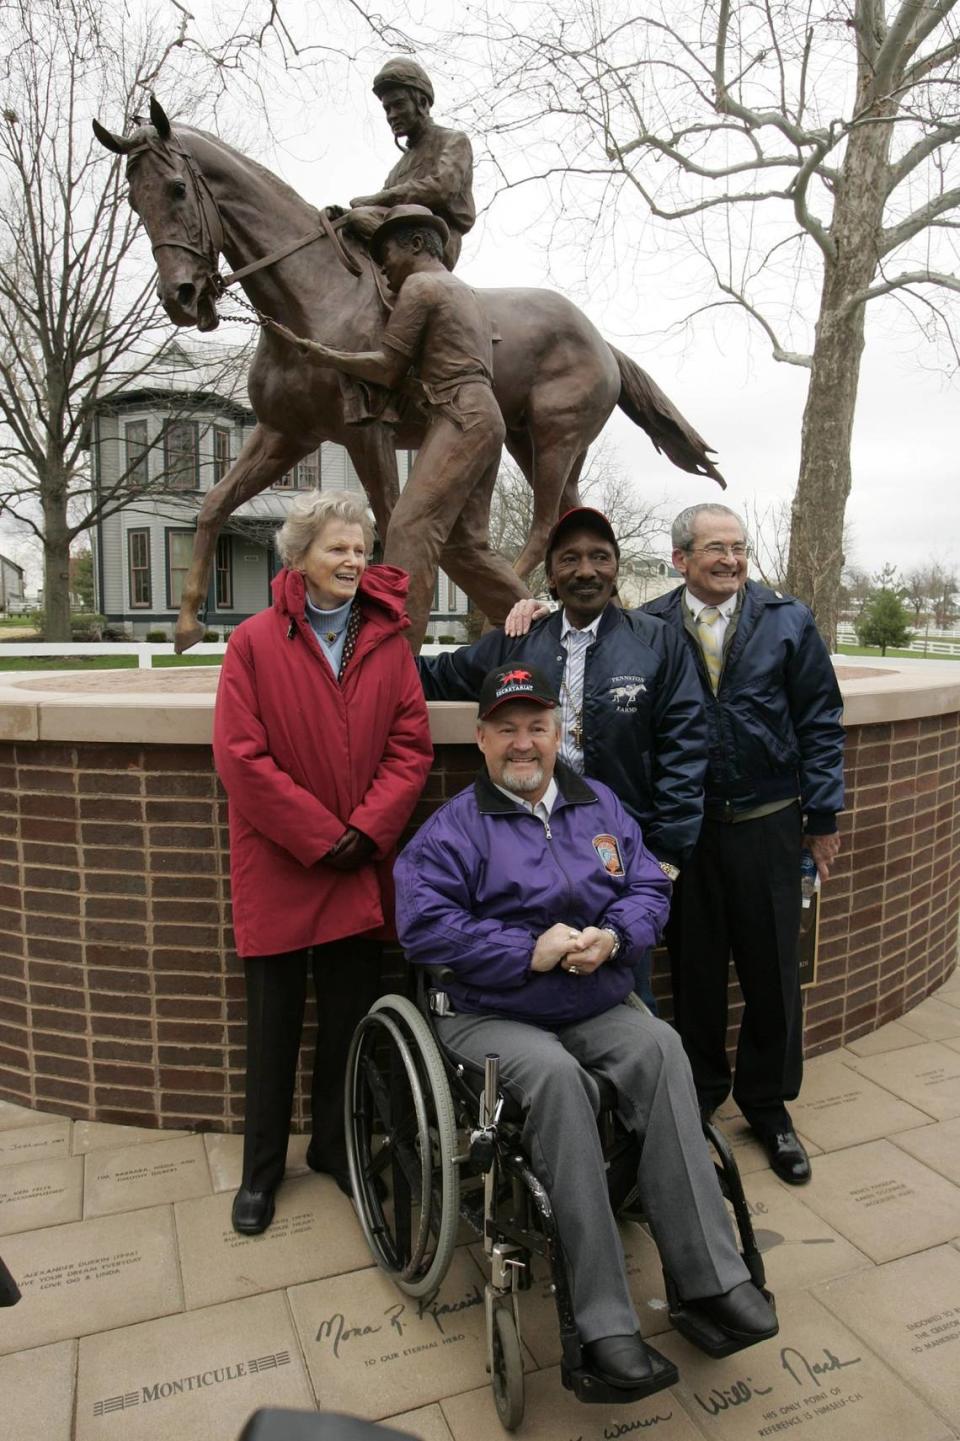 Secretariat’s owner, Penny Chenery, left, posed with the Secretariat team of jockey Ron Turcotte, seated, and exercise riders Charlie Davis and Jim Gaffney, right, at the dedication of a bronze statue of the horse at the Kentucky Horse Park in 2006.